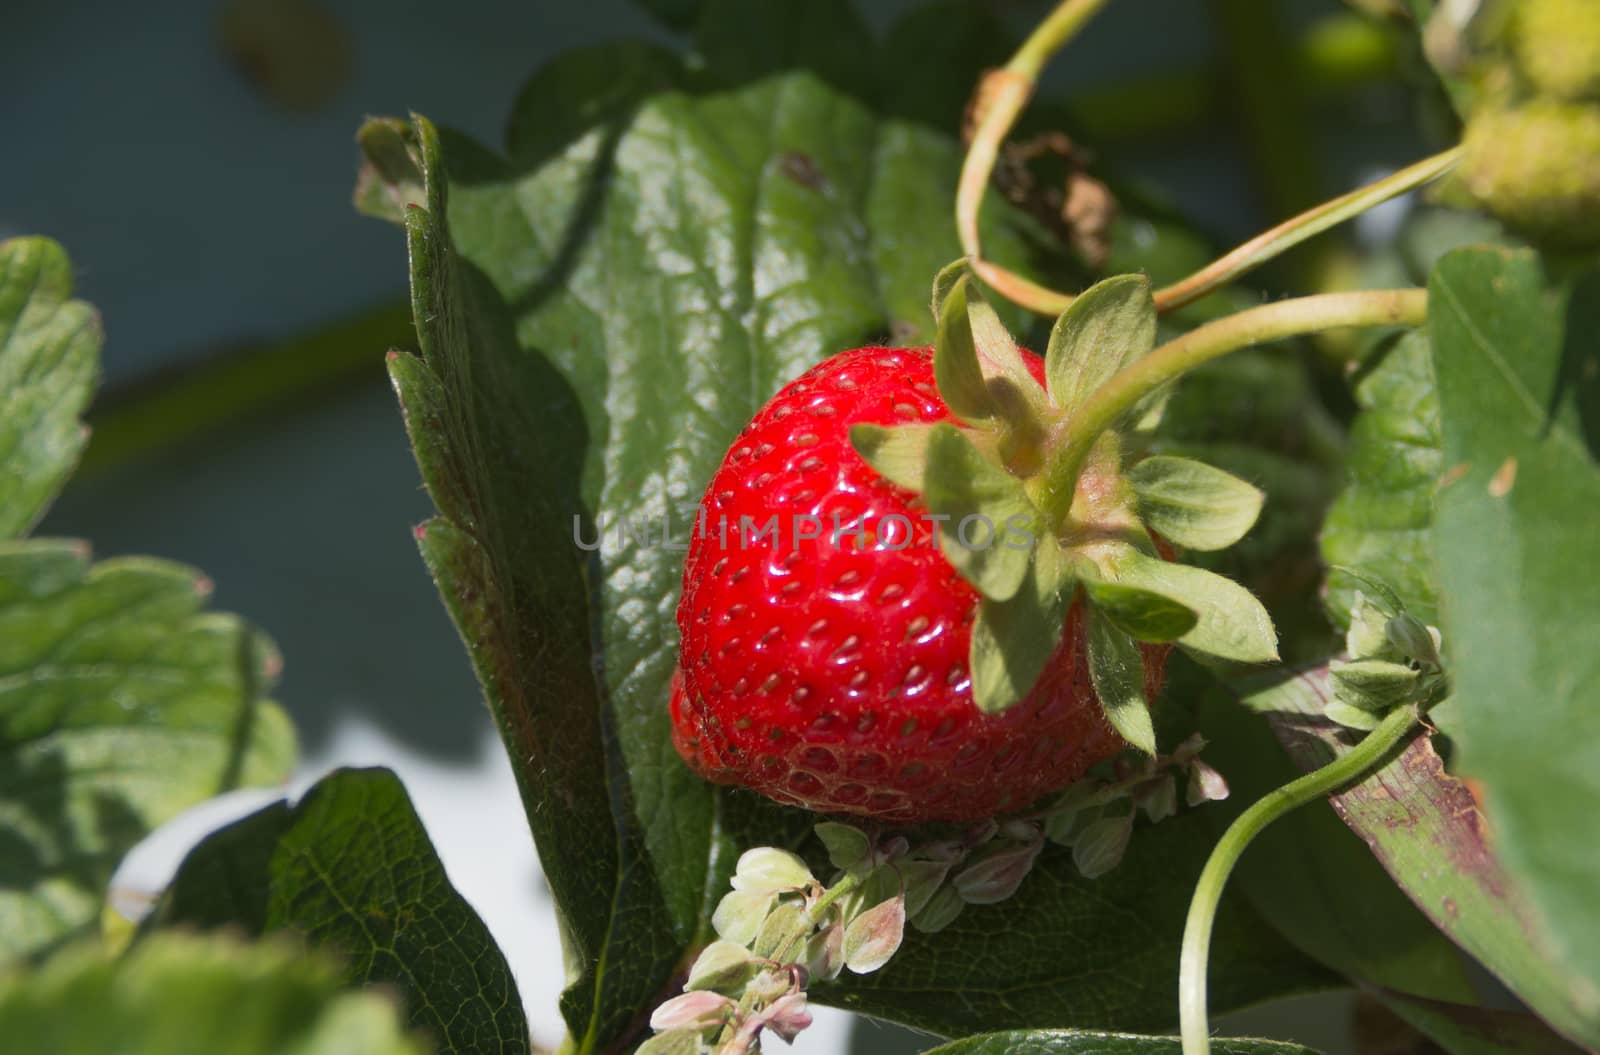 A beautiful, red strawberry berry was hiding in the leaves of a small bush